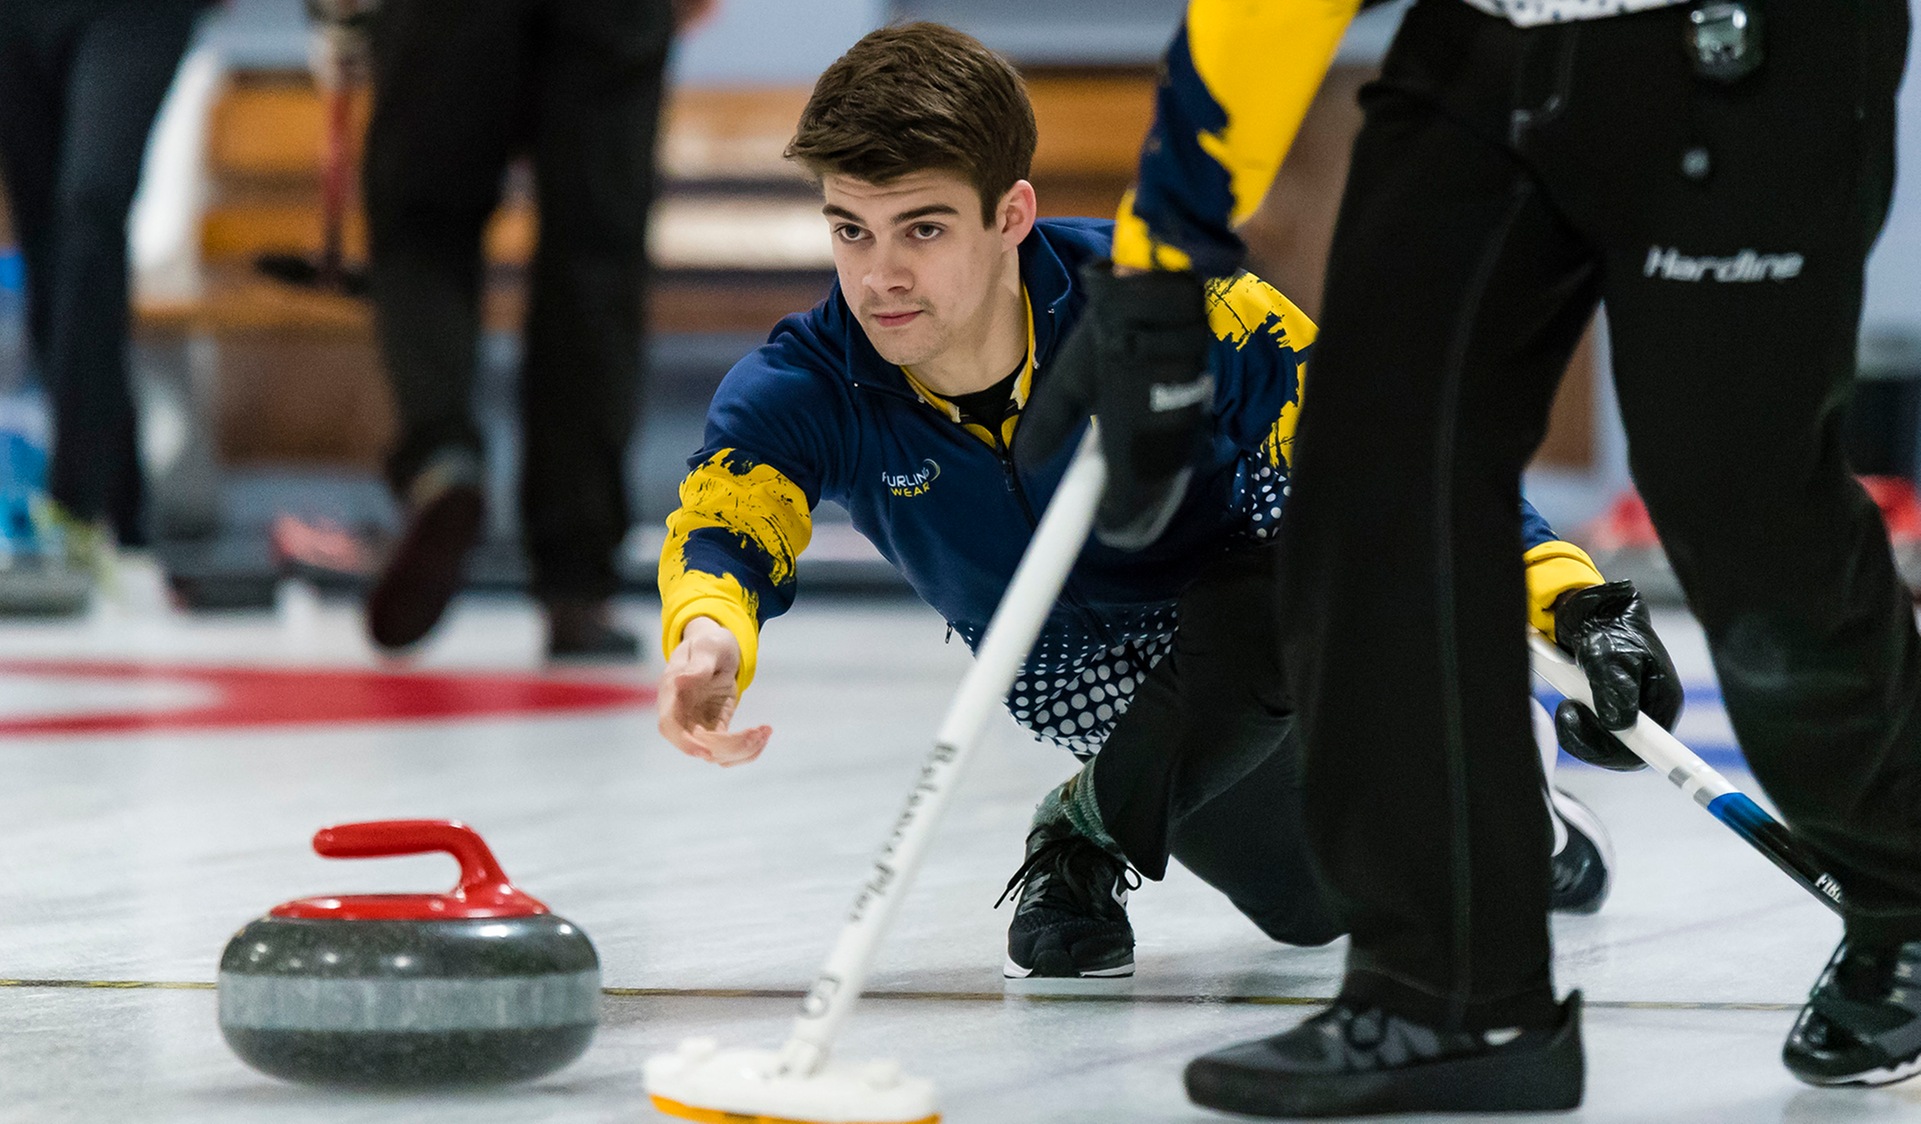 DAY TWO COMPLETE AT 2019 OCAA CURLING PROVINCIALS